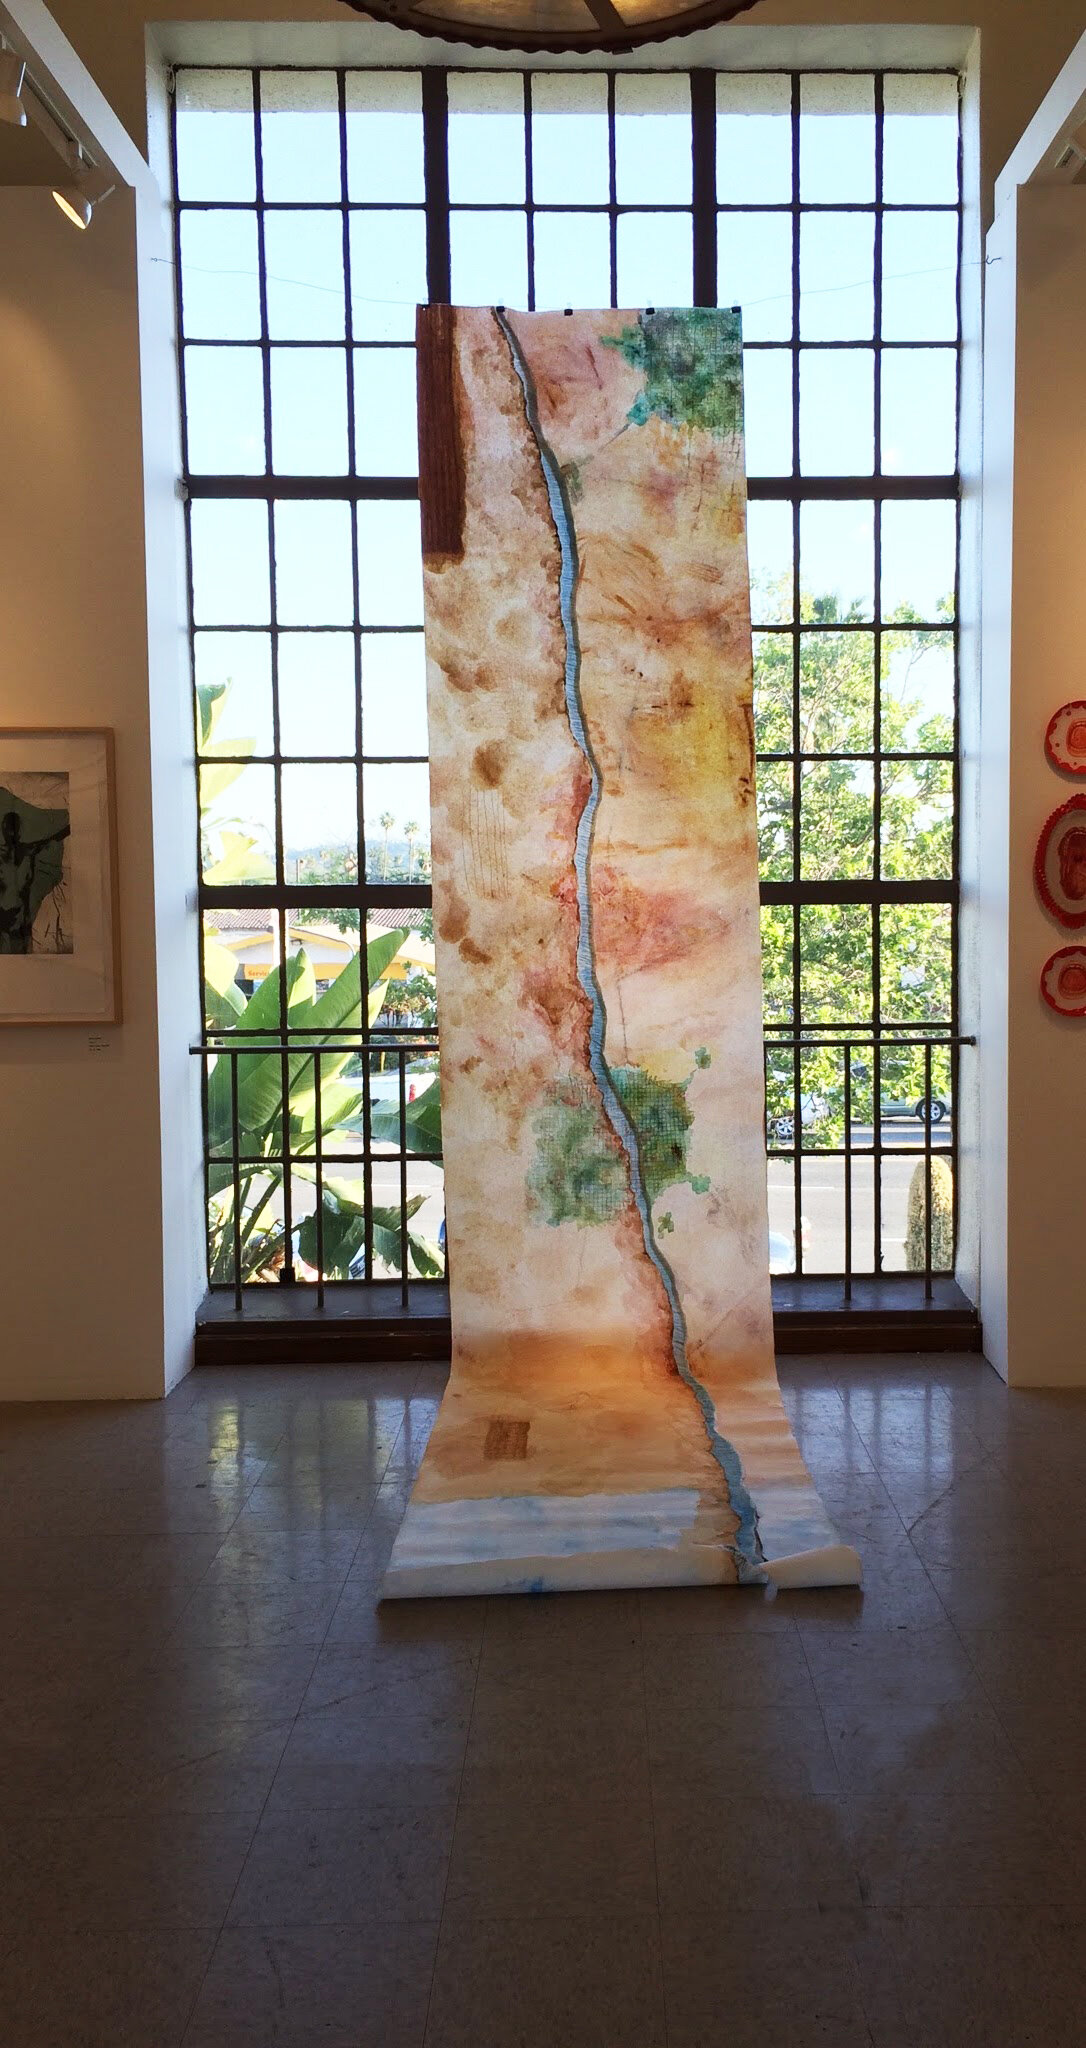 Installation view at Eagle Rock Center for the Arts